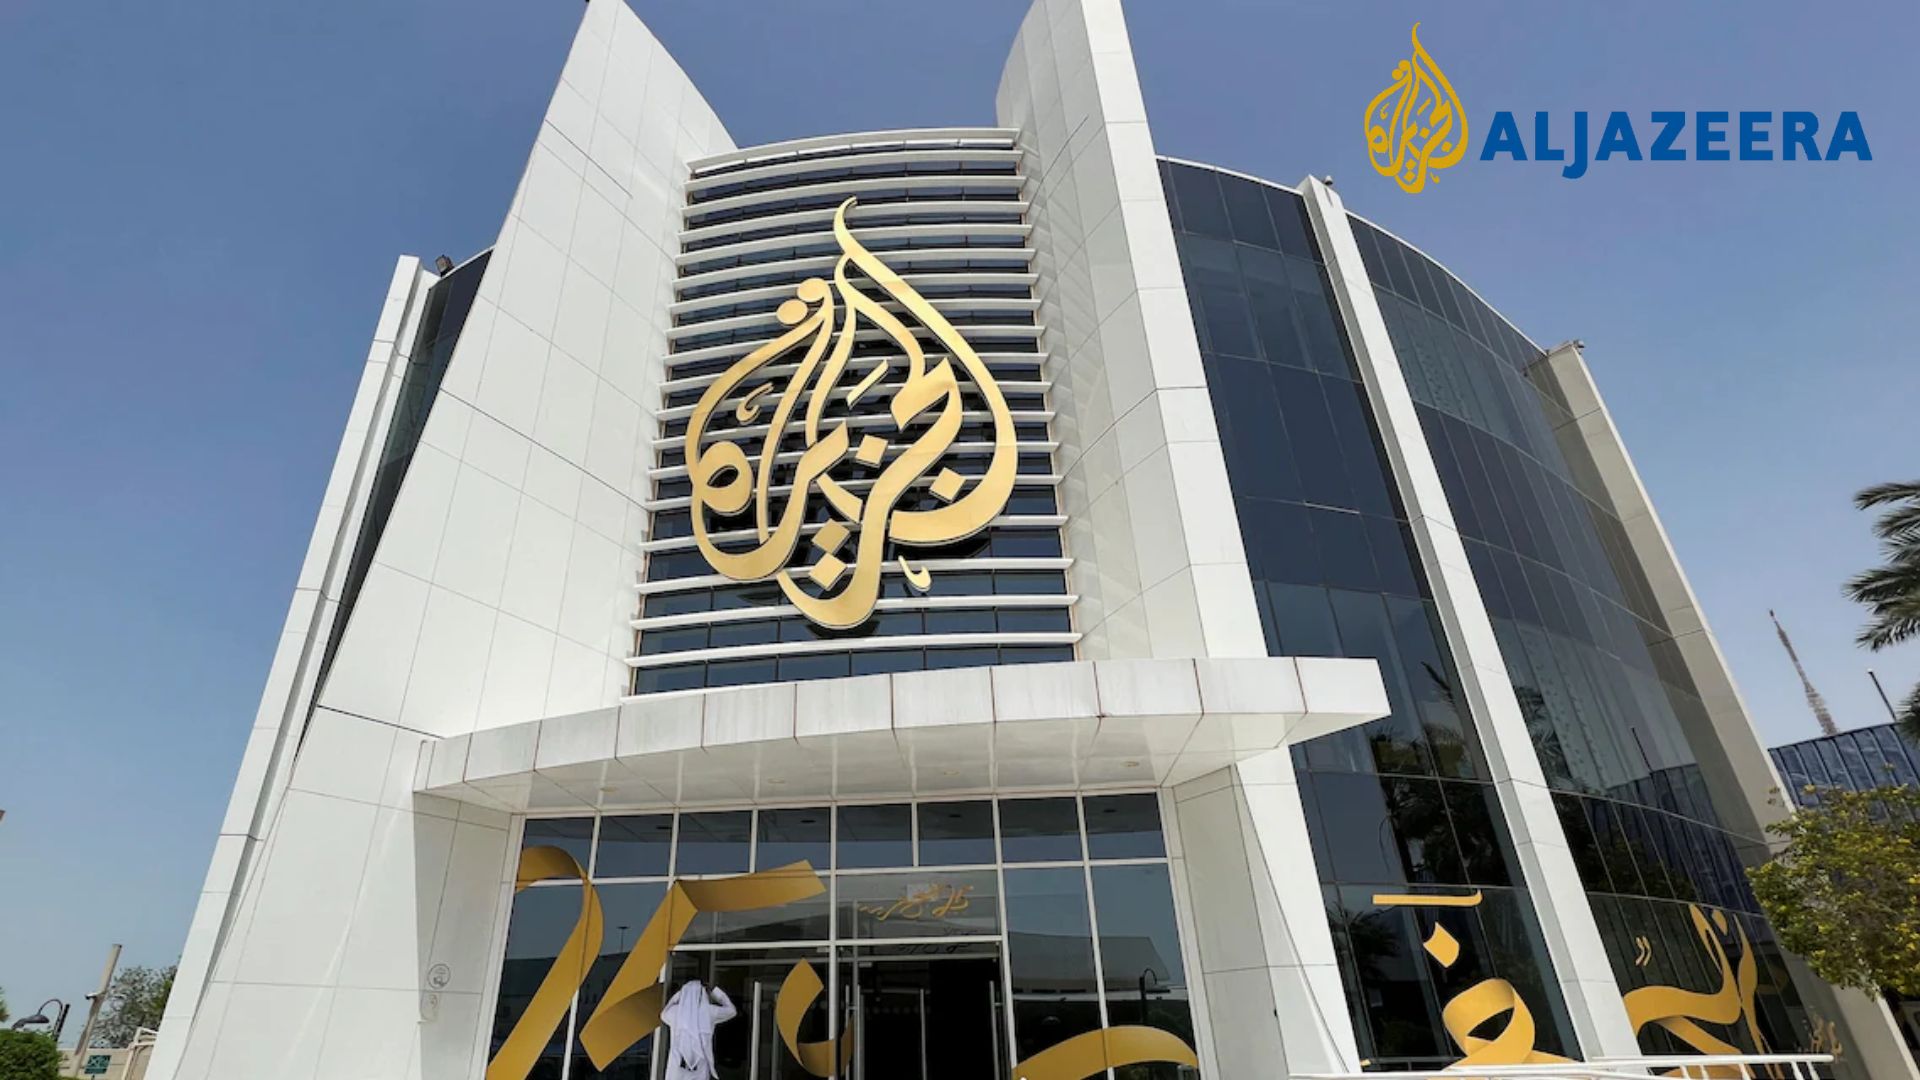 Police Seize Al Jazeera’s Broadcasting Equipment as News Network Closes Operation in Israel